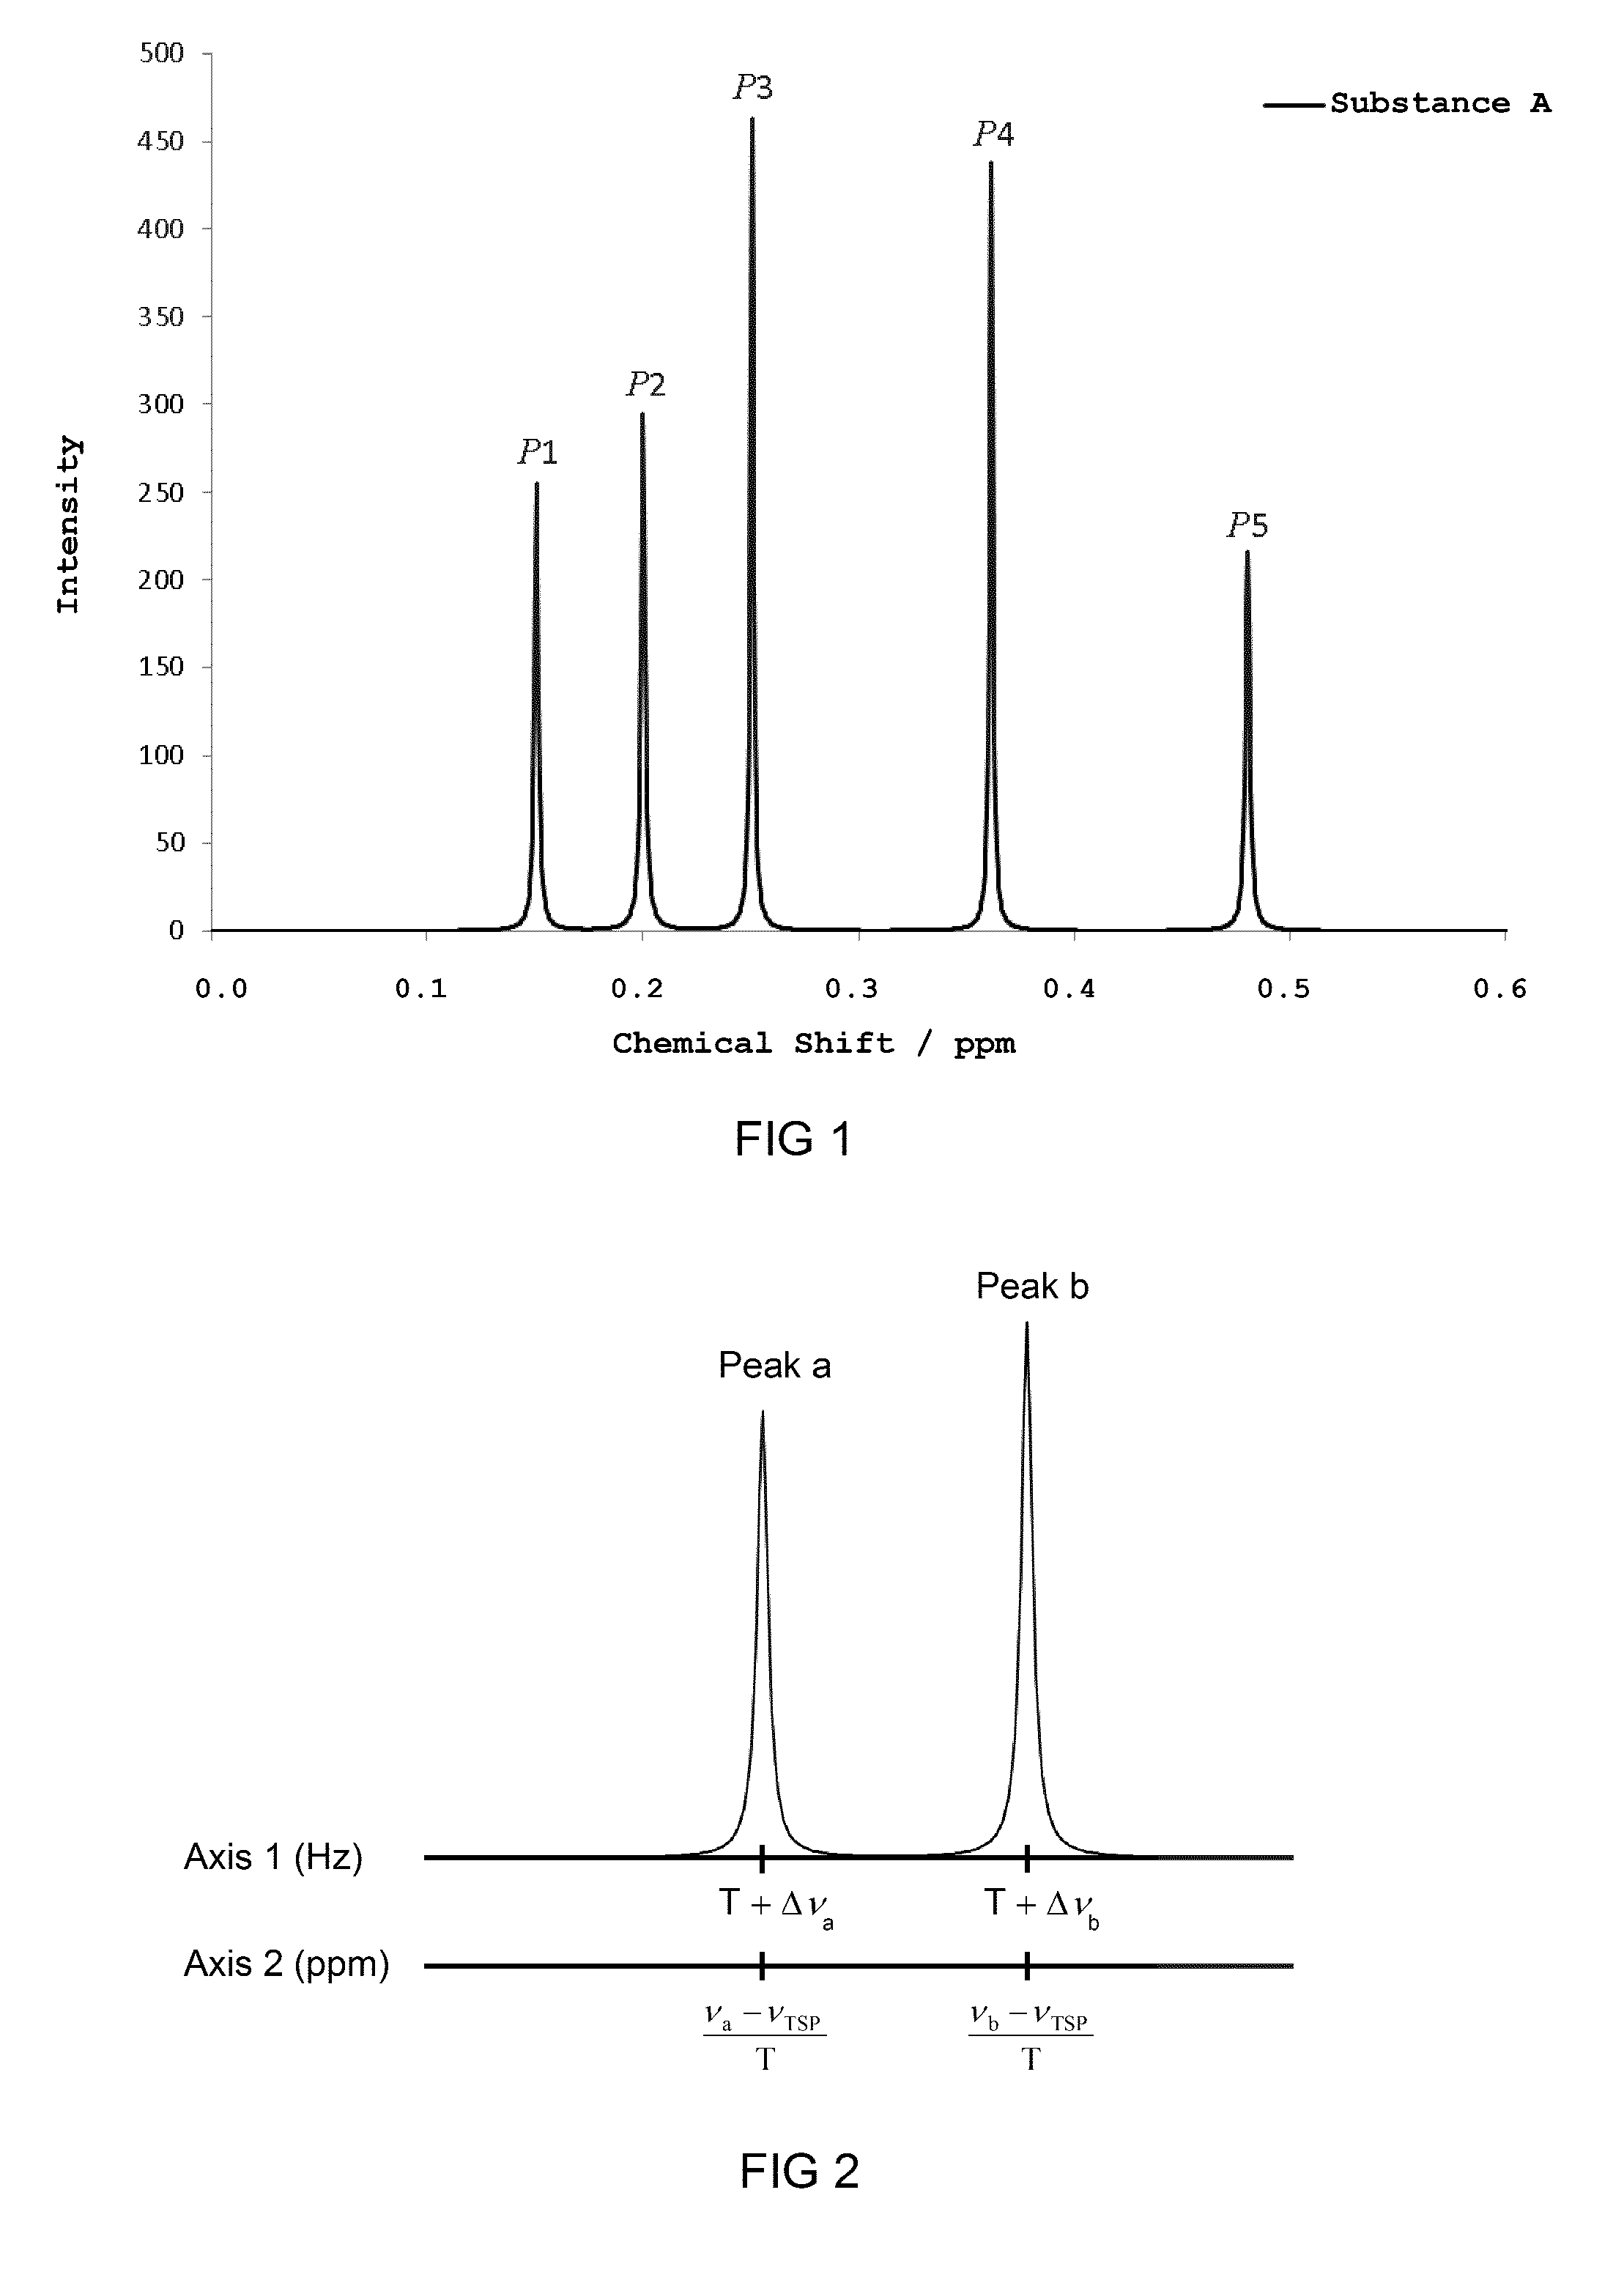 Method for substance identification from NMR spectrum